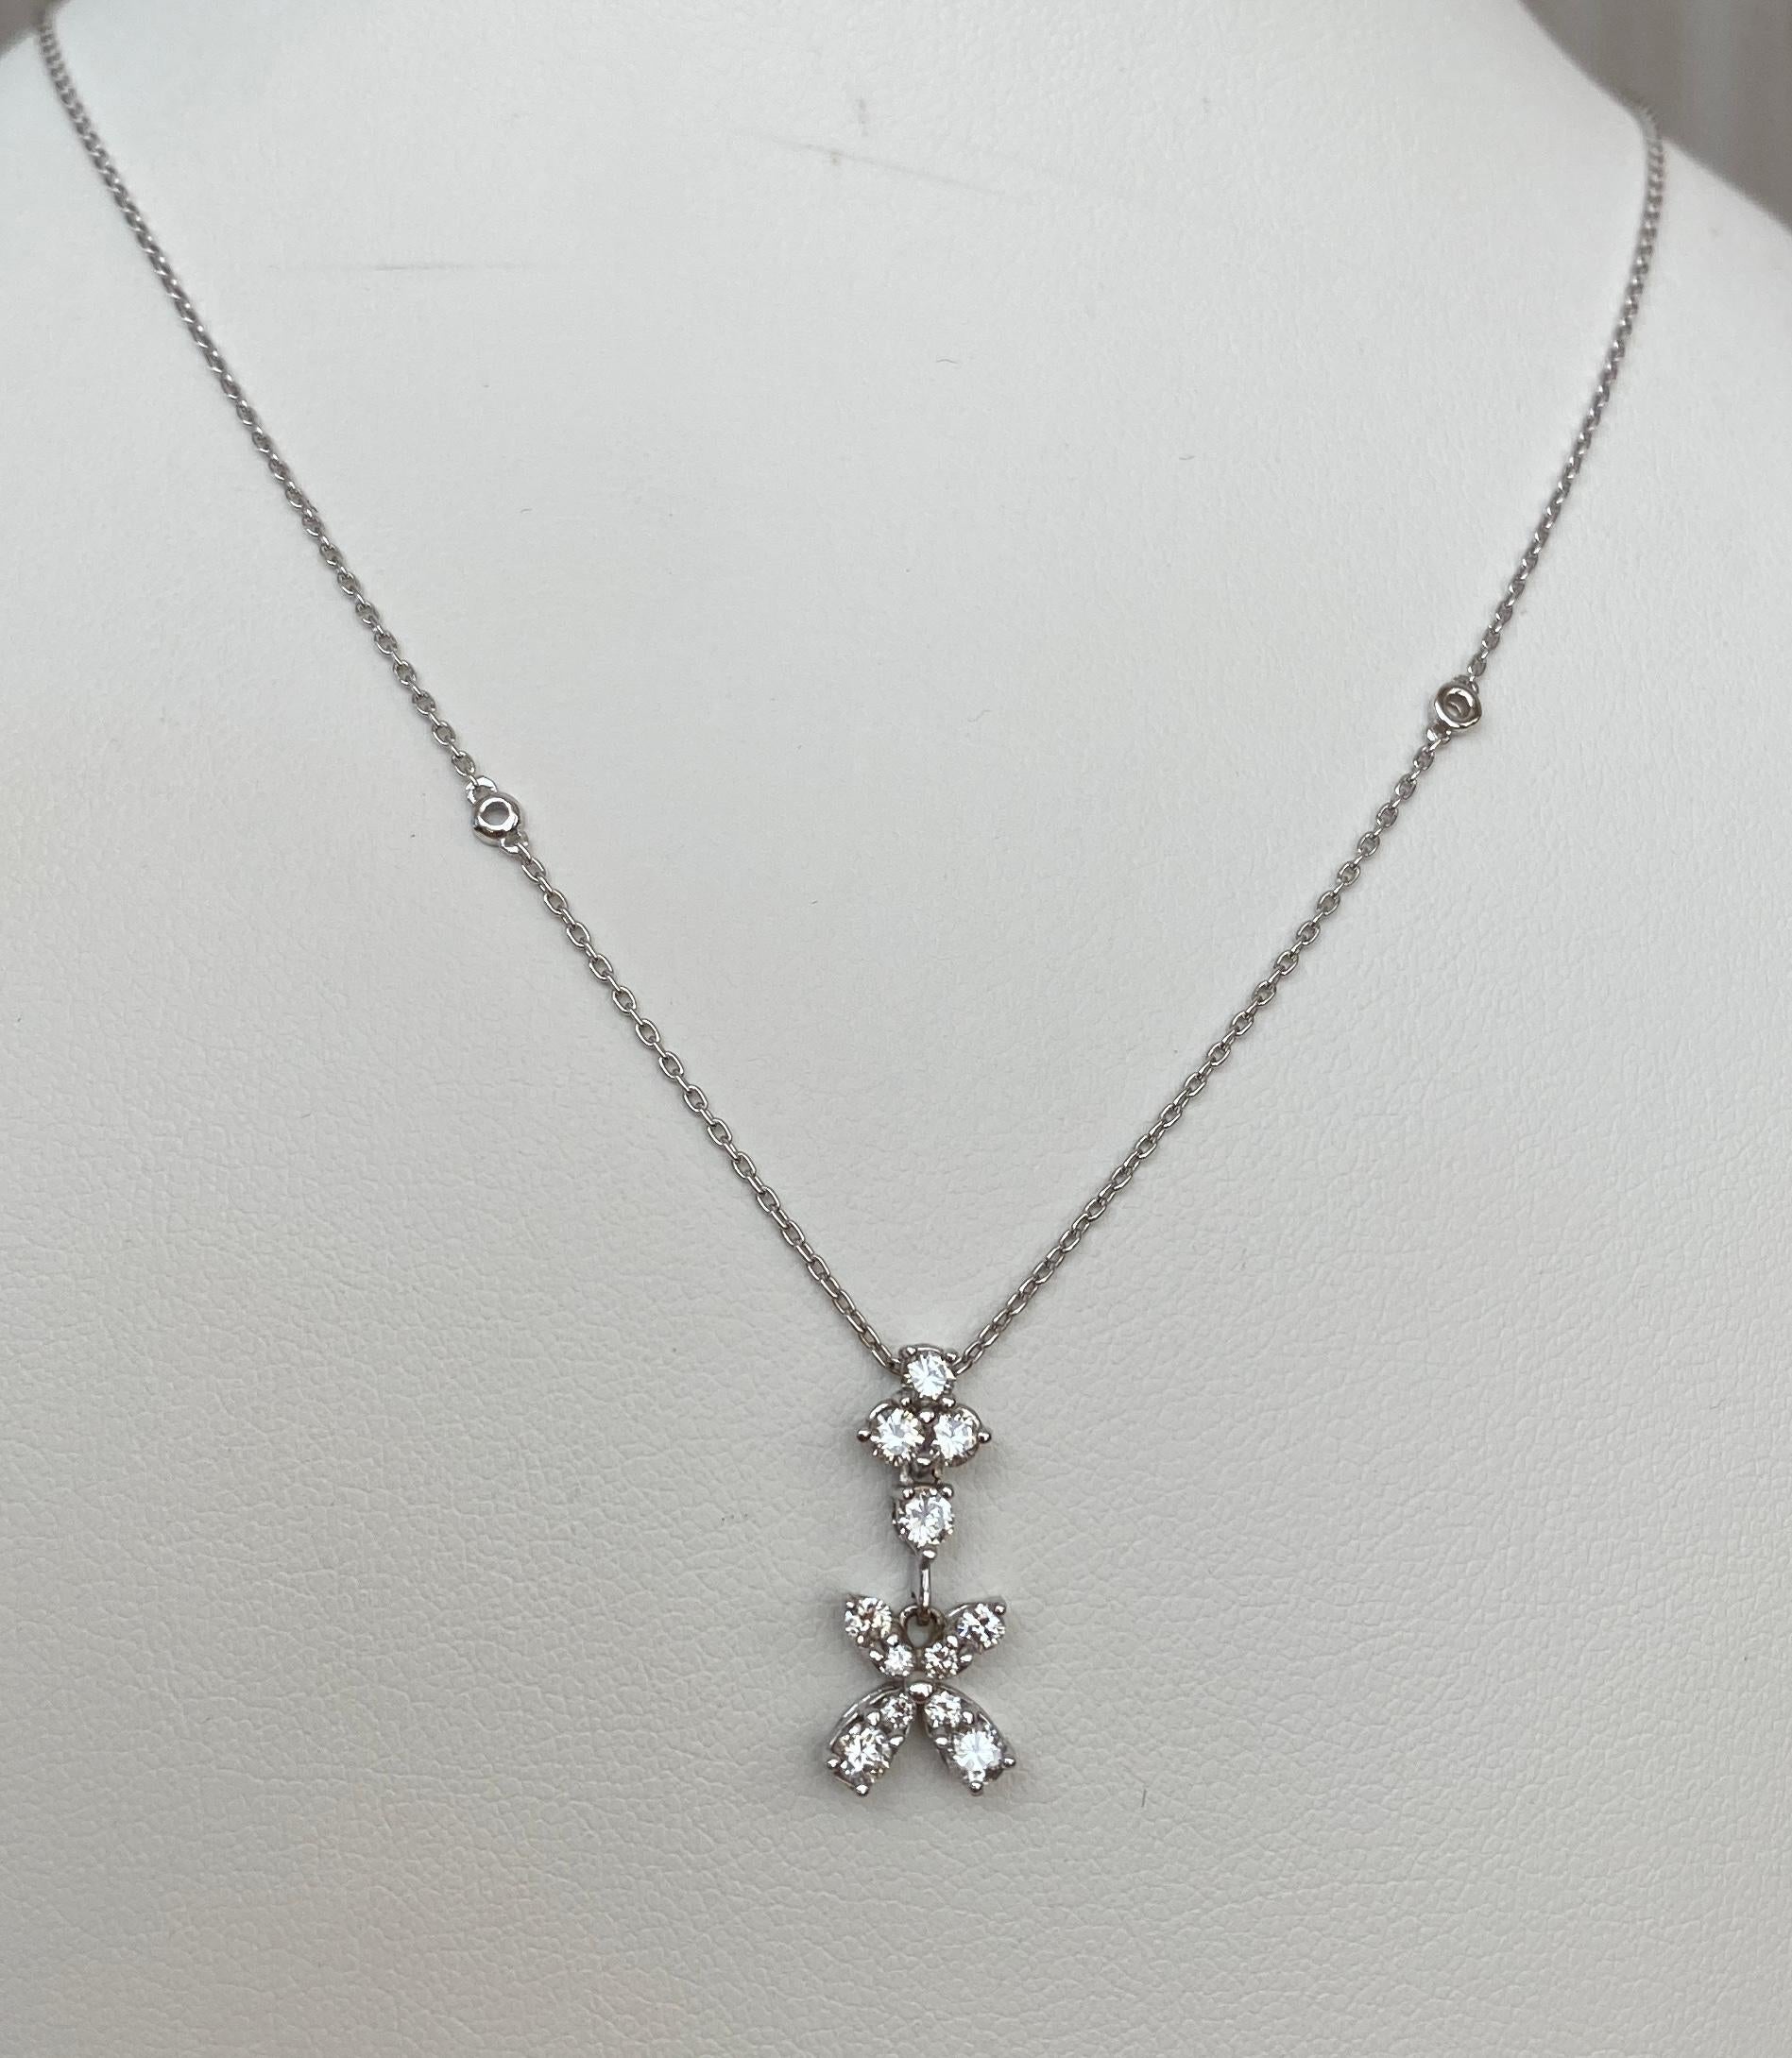 Contemporary 18 kt White gold necklace with diamond pendant For Sale